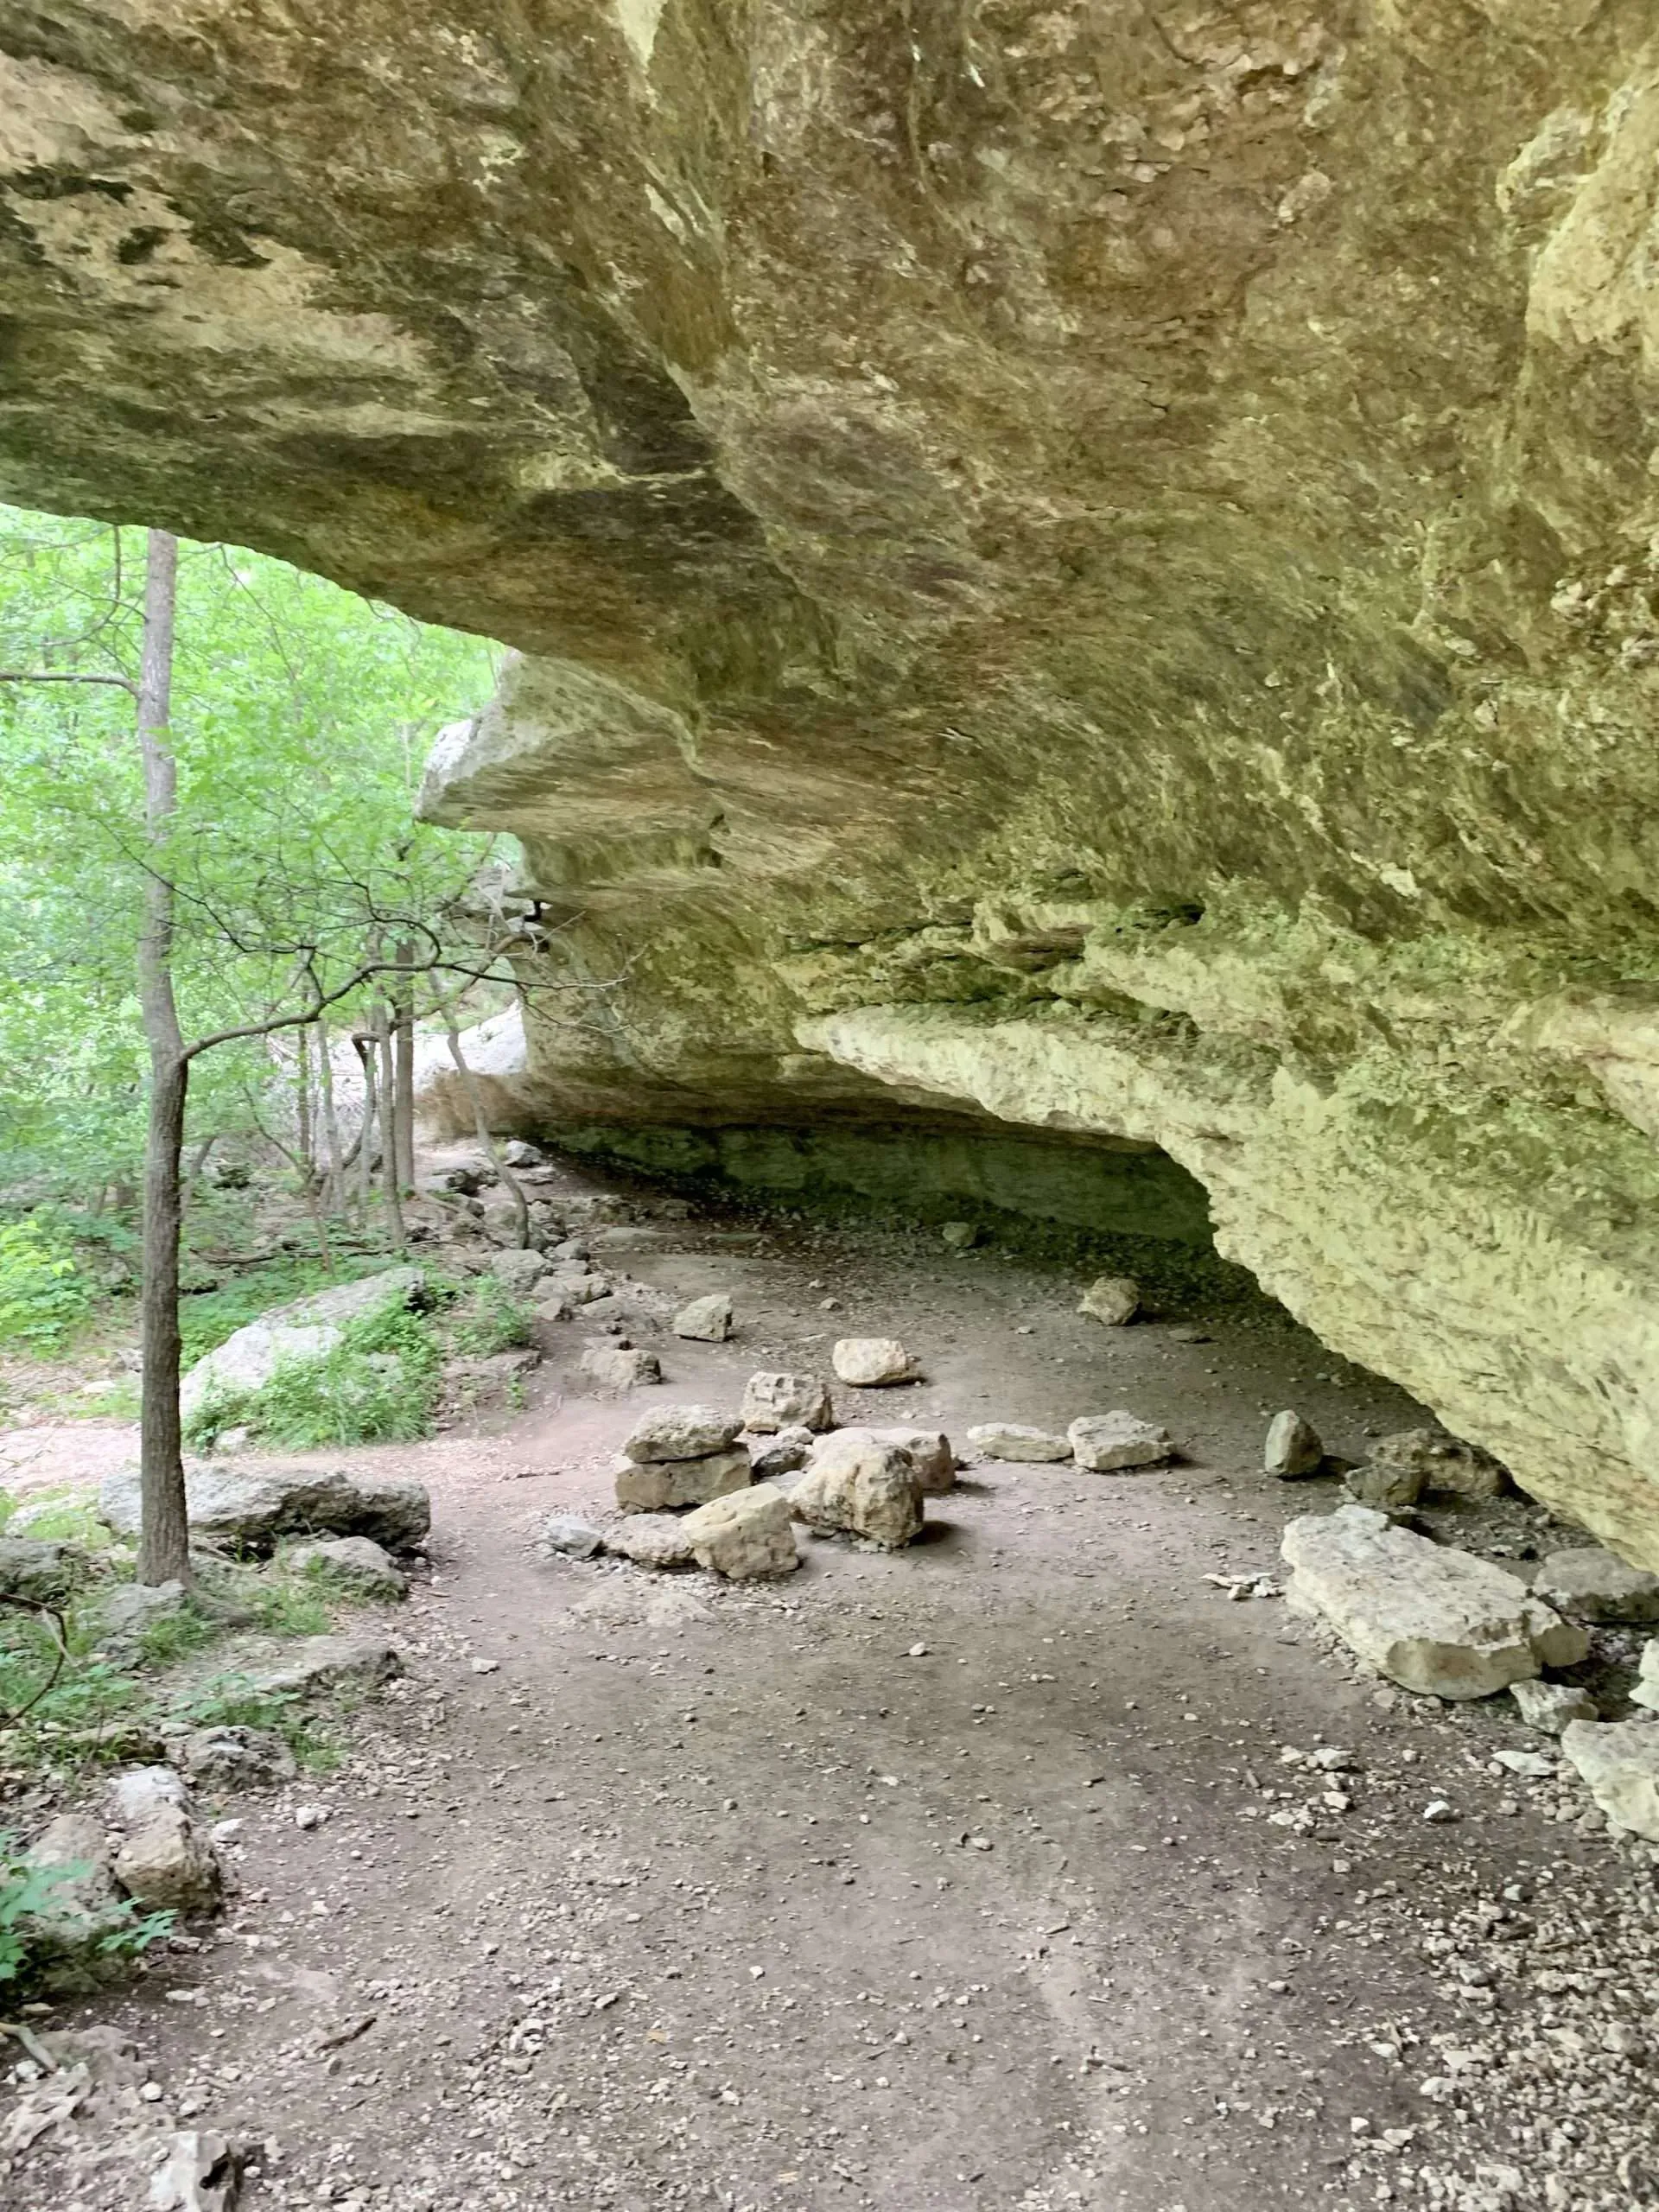 View of the cave at Mother Neff State Park near Waco, TX.